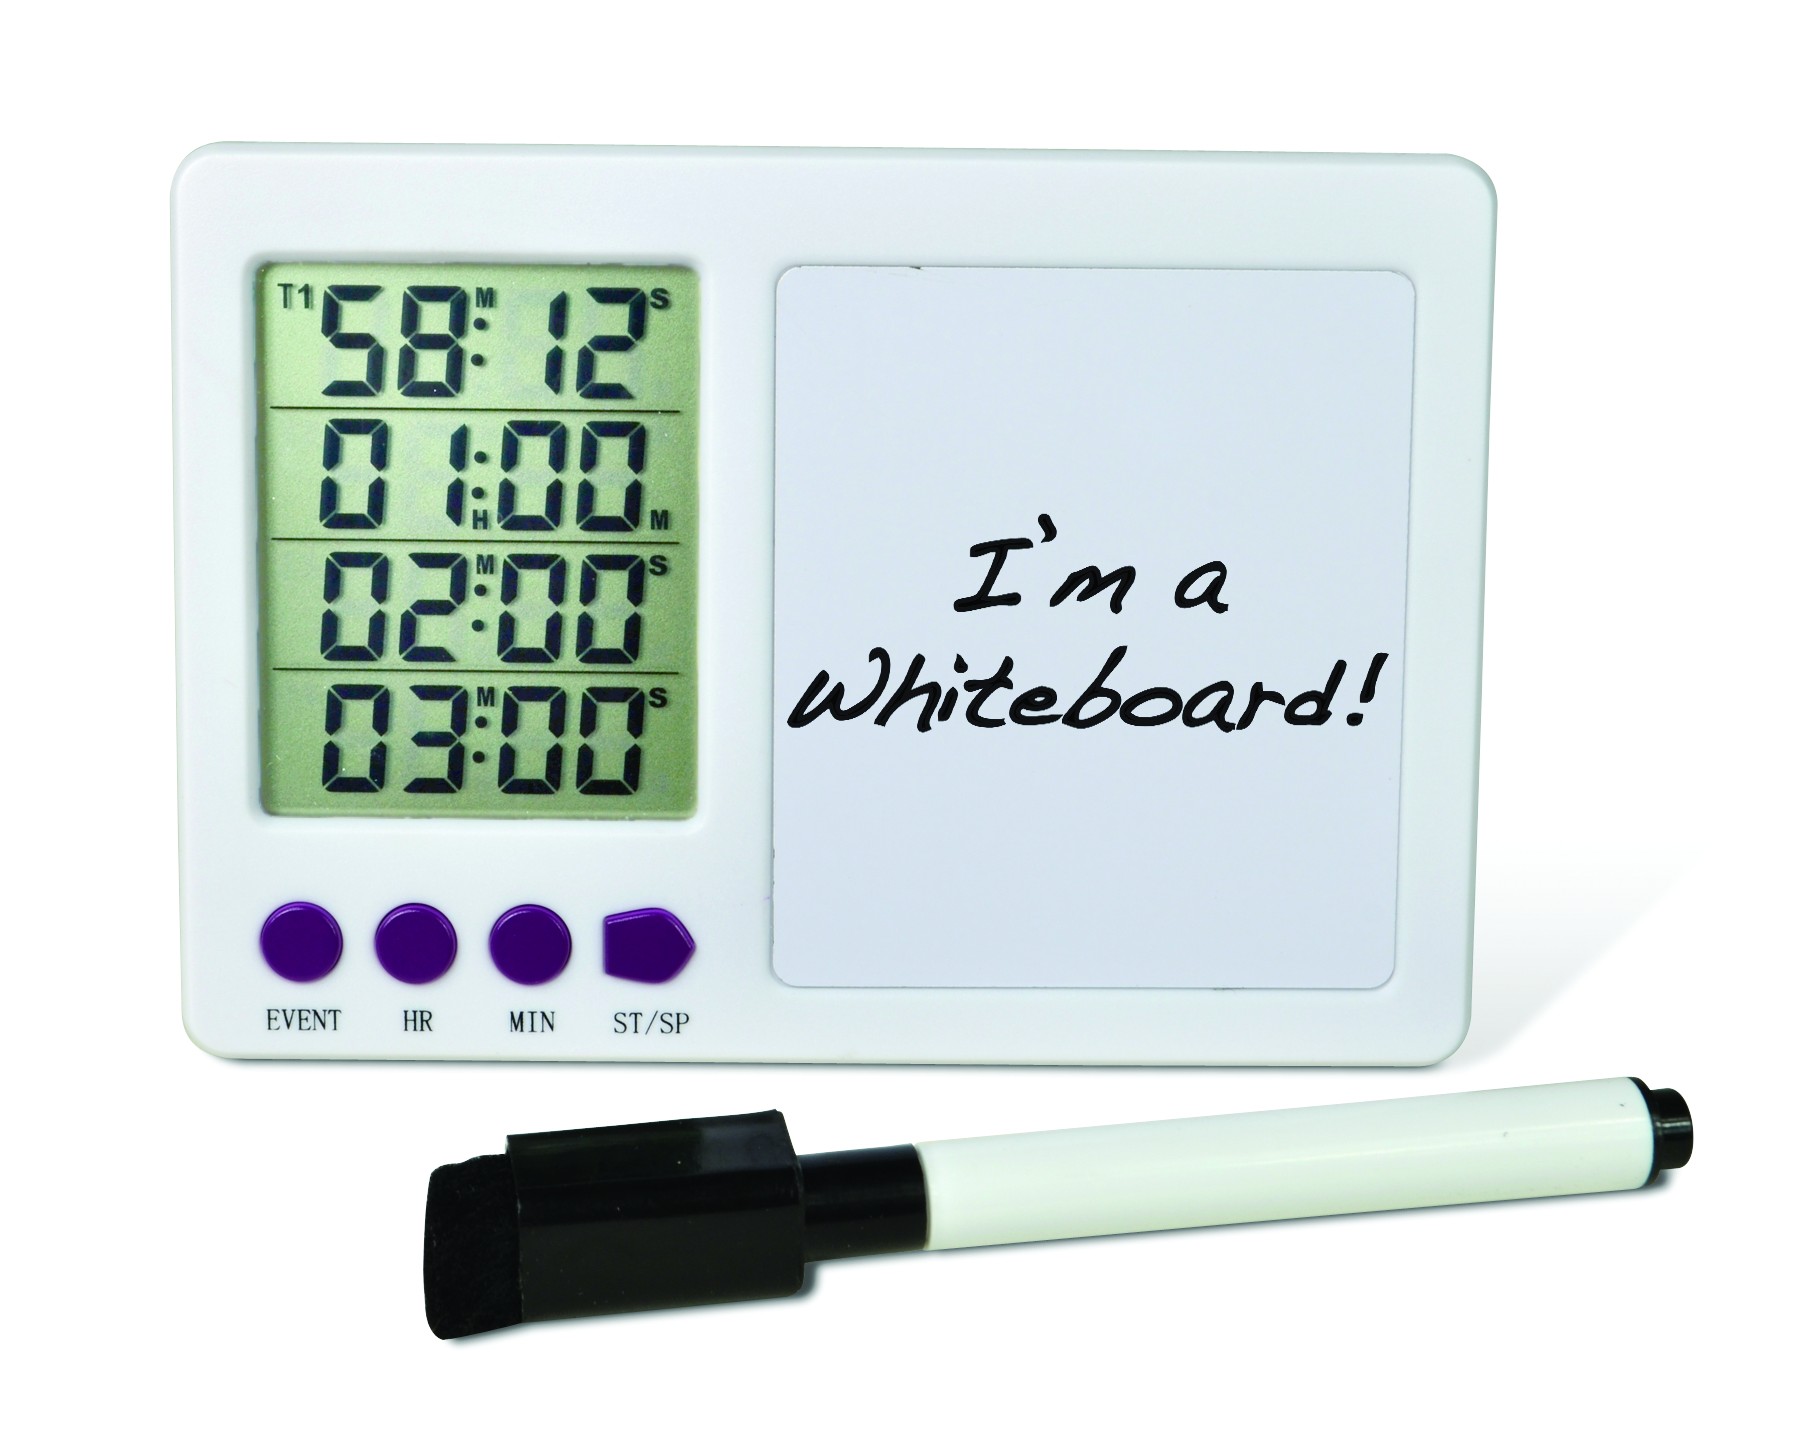 SP Bel-Art, H-B DURAC 4-Channel Electronic Timer with White Board and Certificate of Calibration